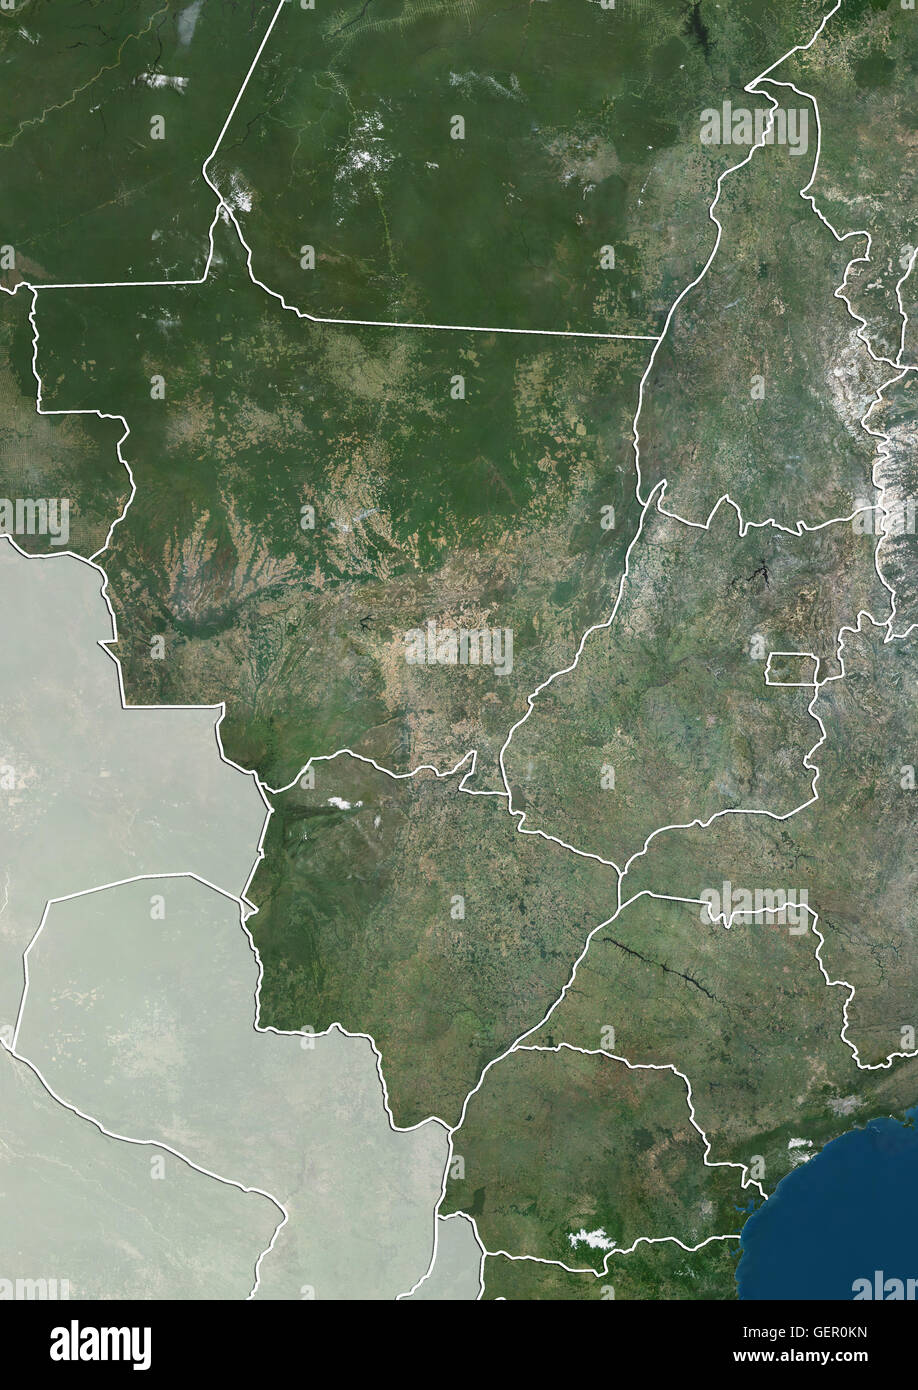 Satellite view of the Central-West Region of Brazil (with administrative boundaries and mask). It is composed of the states of Goias, Mato Grosso and Mato Grosso do Sul, along with the Federal District. The states of Tocantins, Sao Paulo and Parana are al Stock Photo